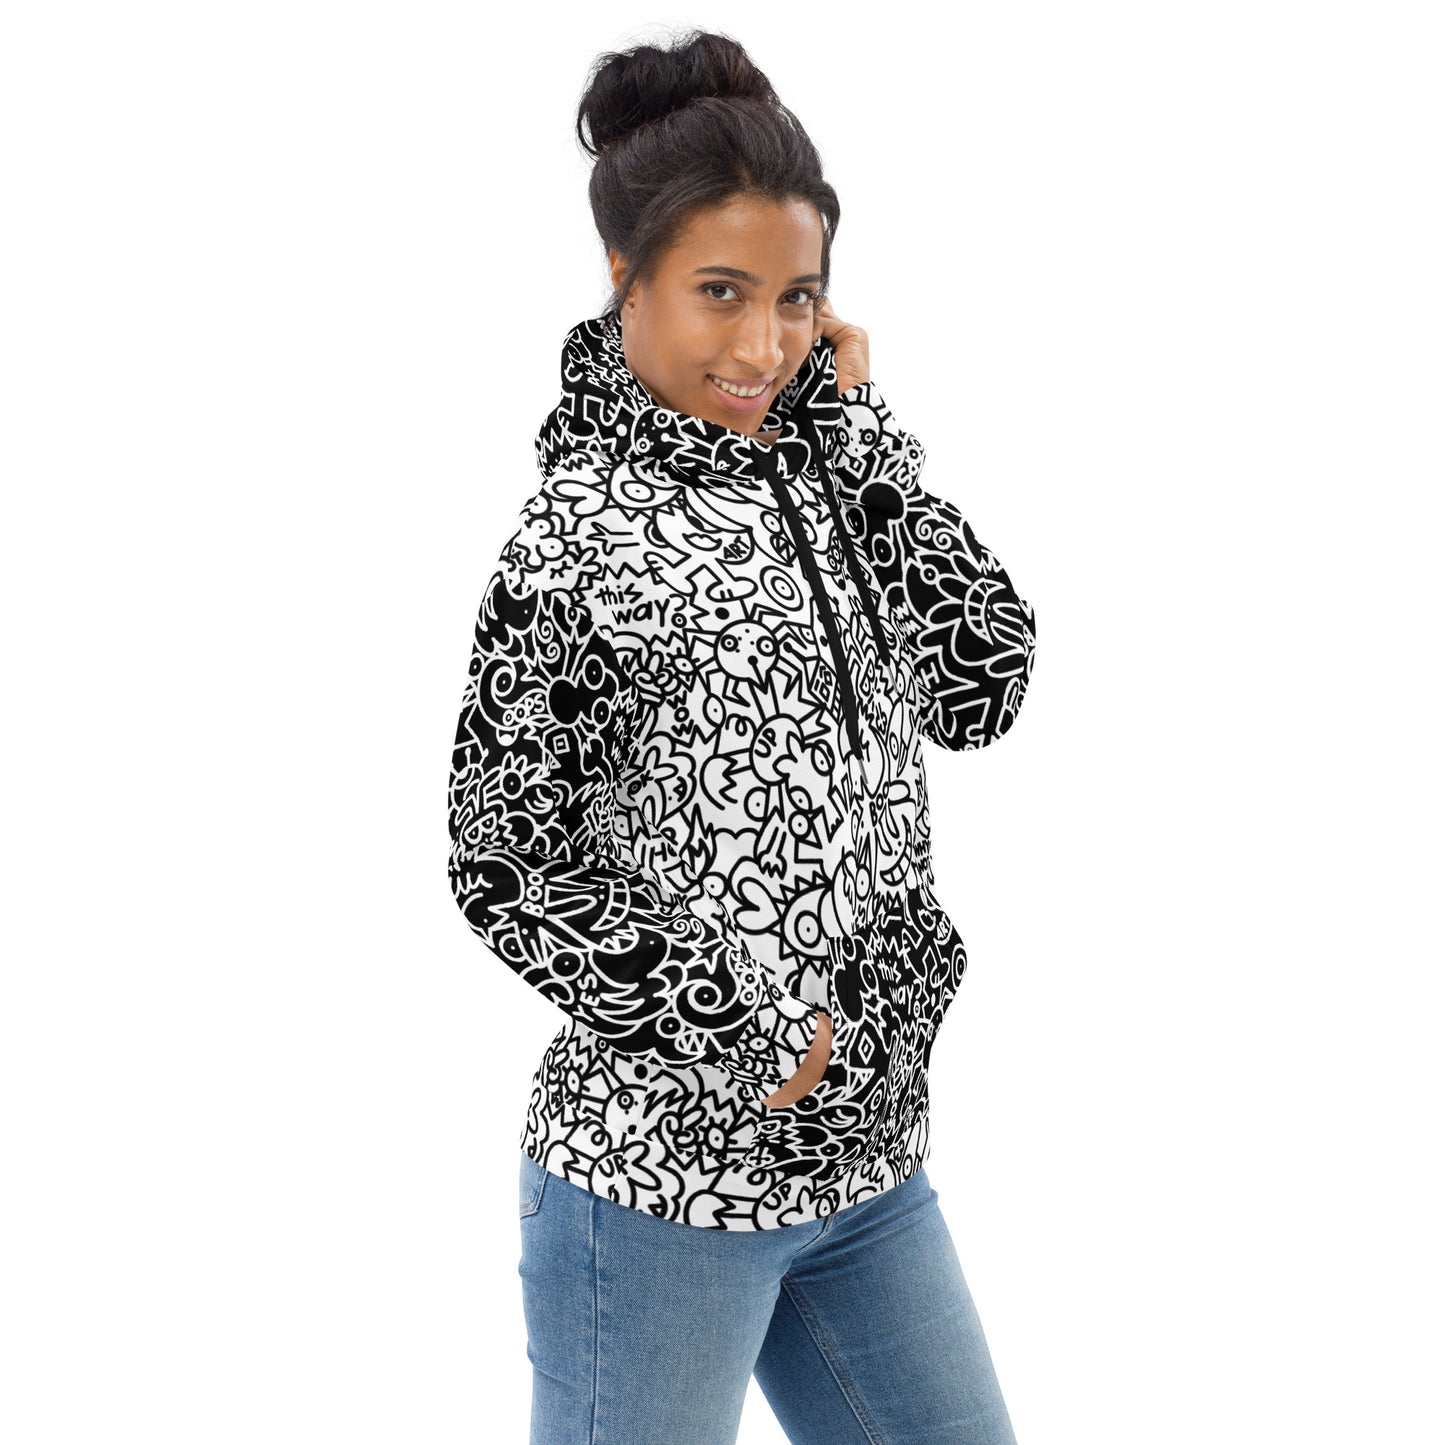 The Playful Power of Great Doodles for Bold People - Unisex Hoodie. Right side view